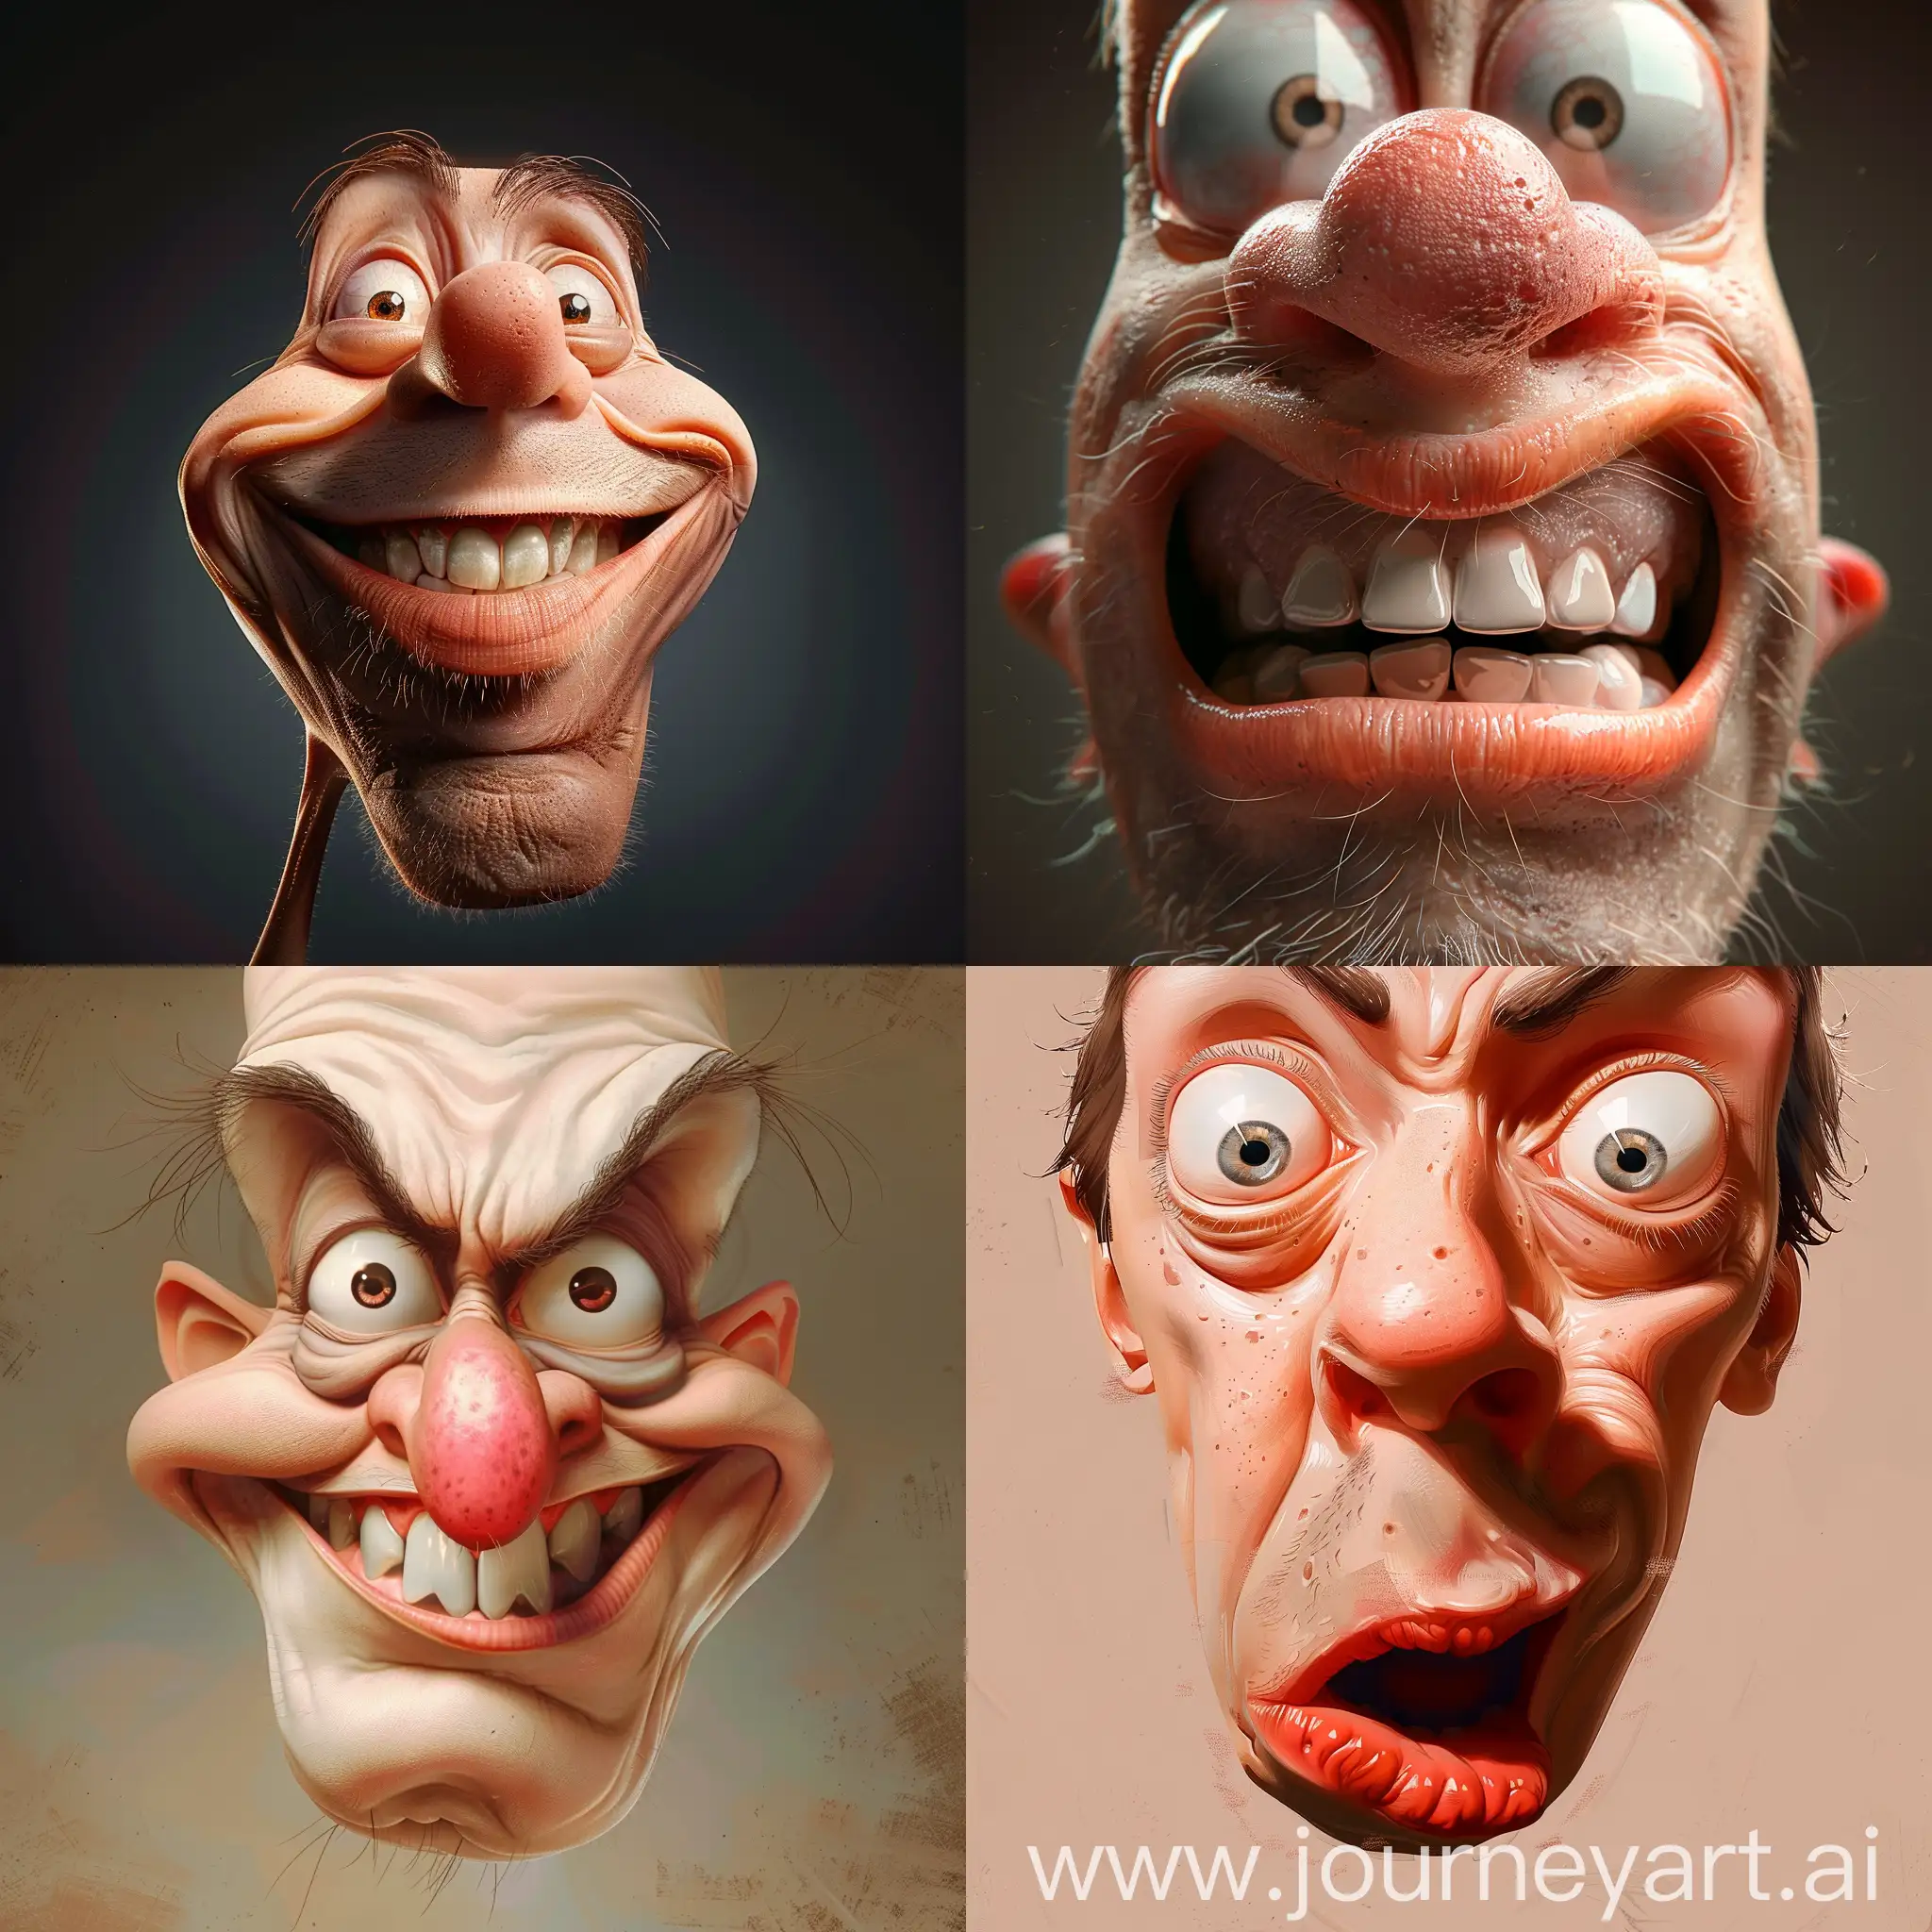 photorealistic image of funny face